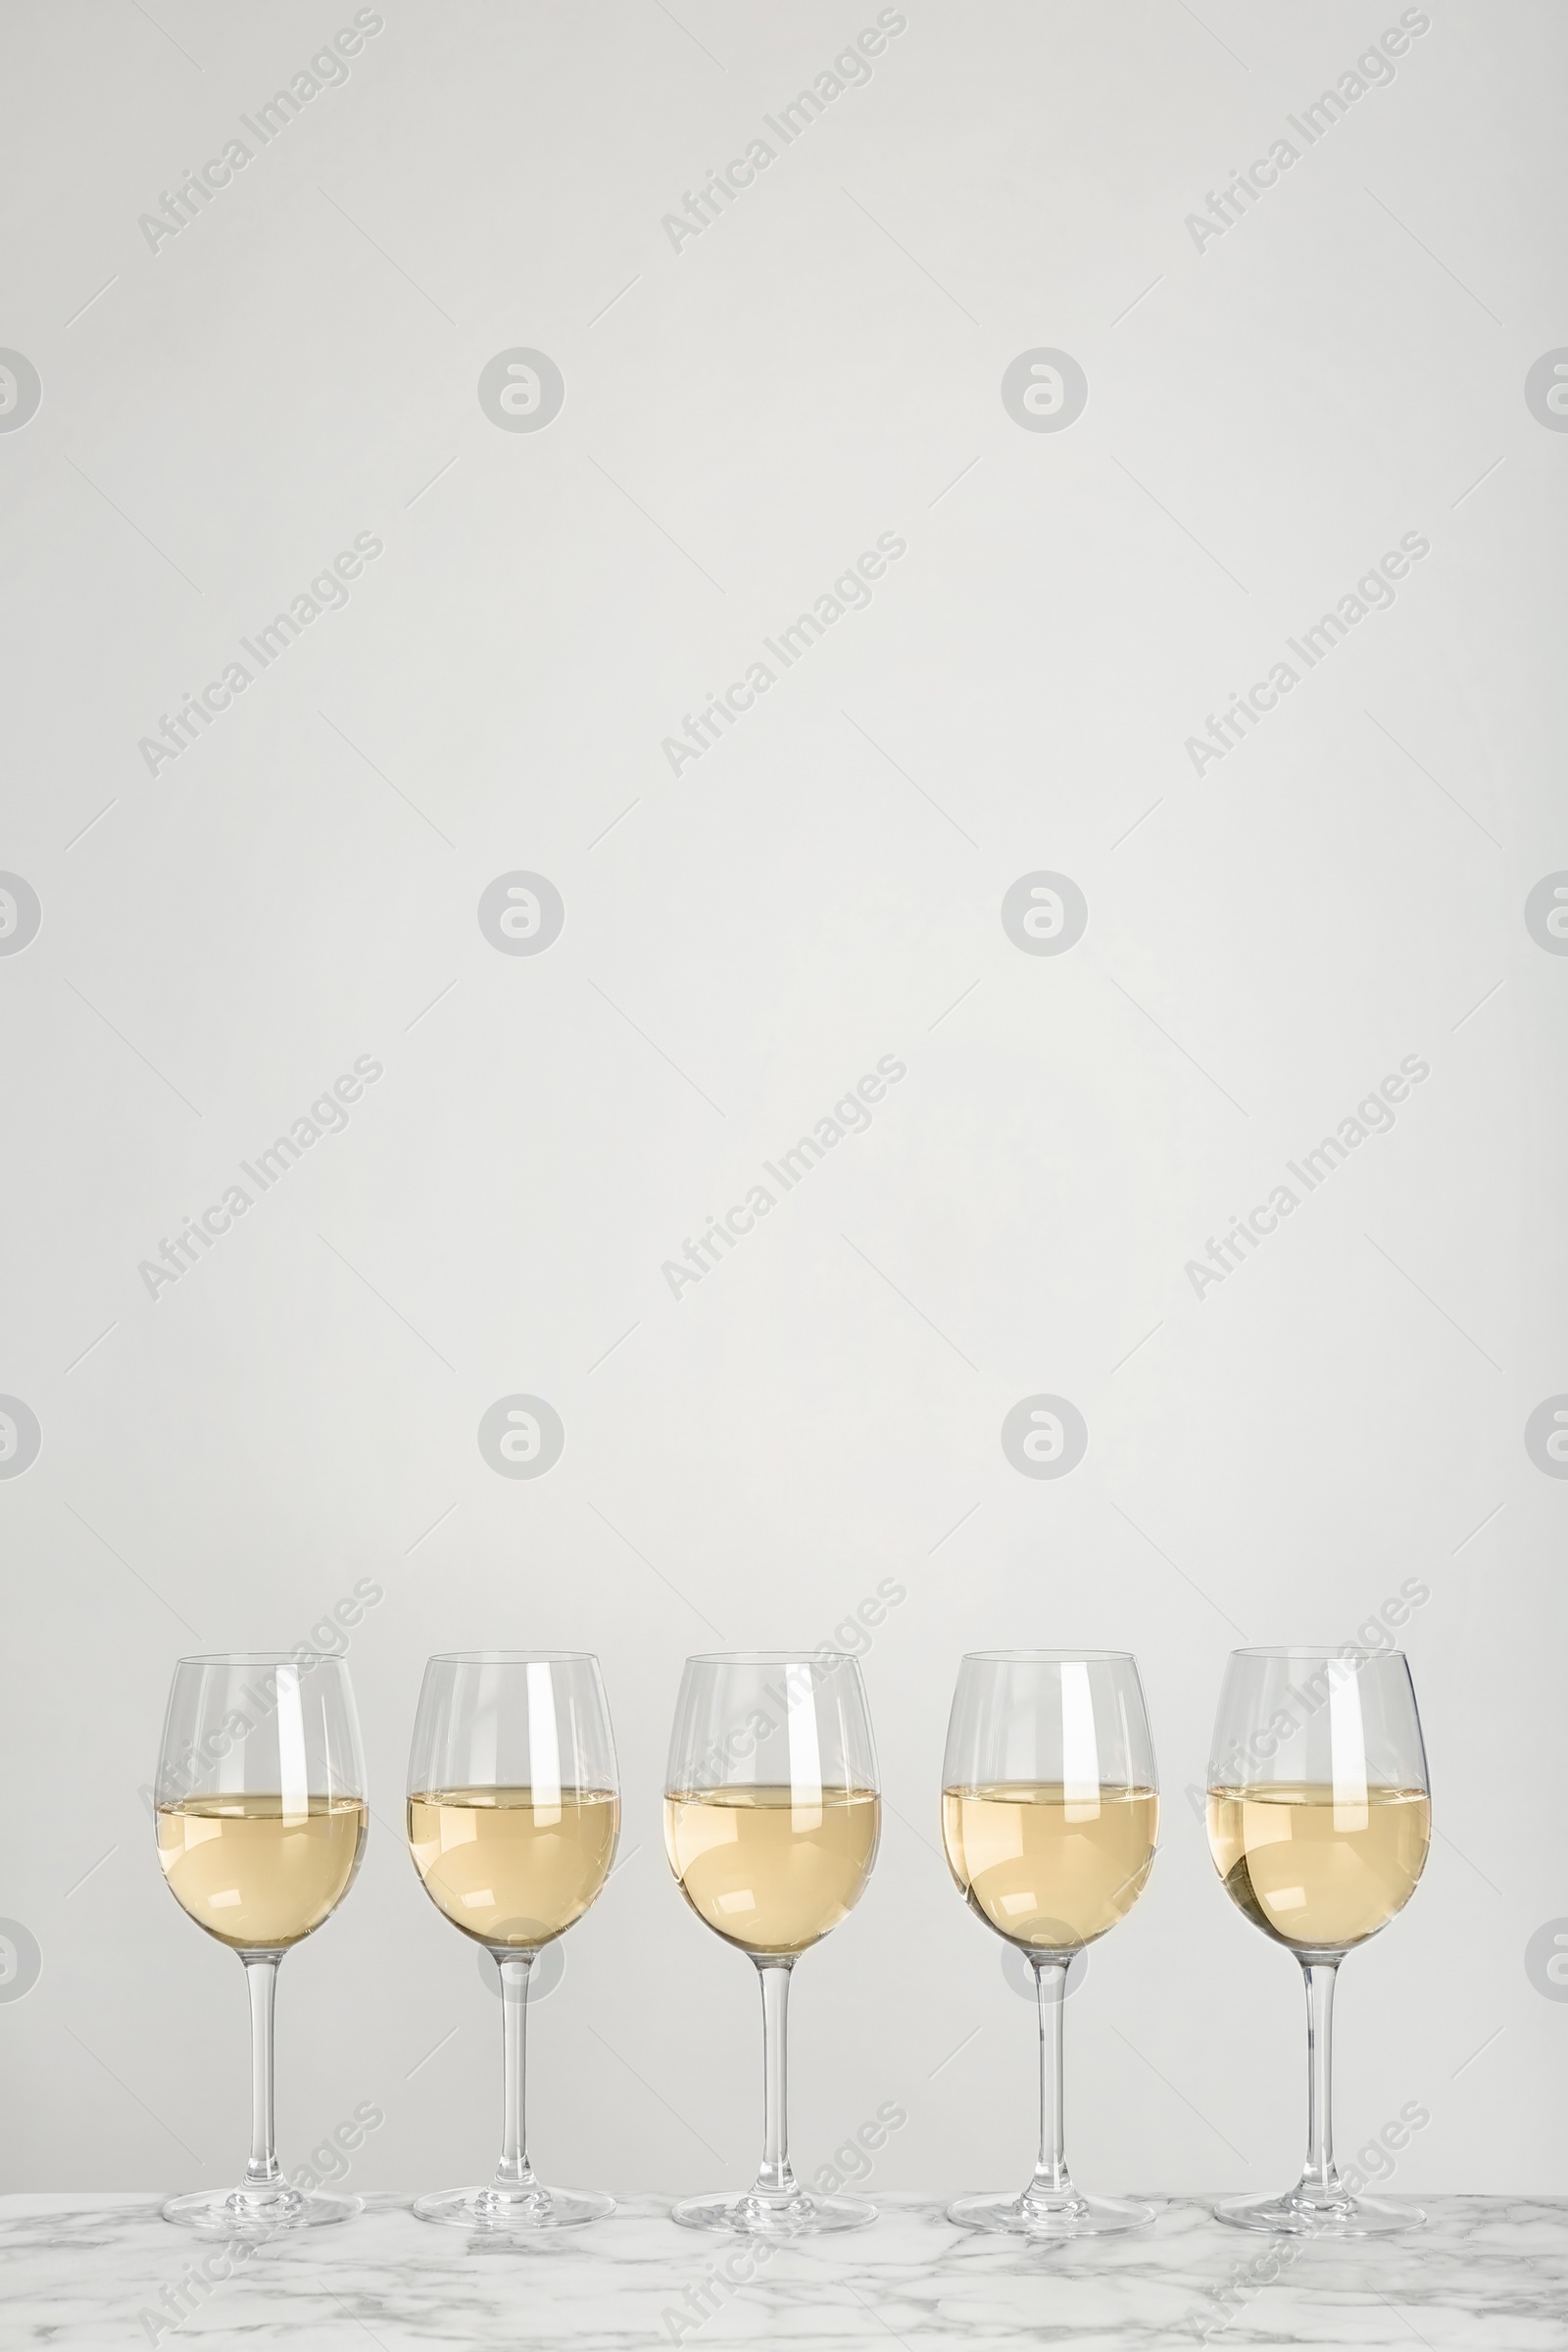 Photo of Glasses with white wine on light background